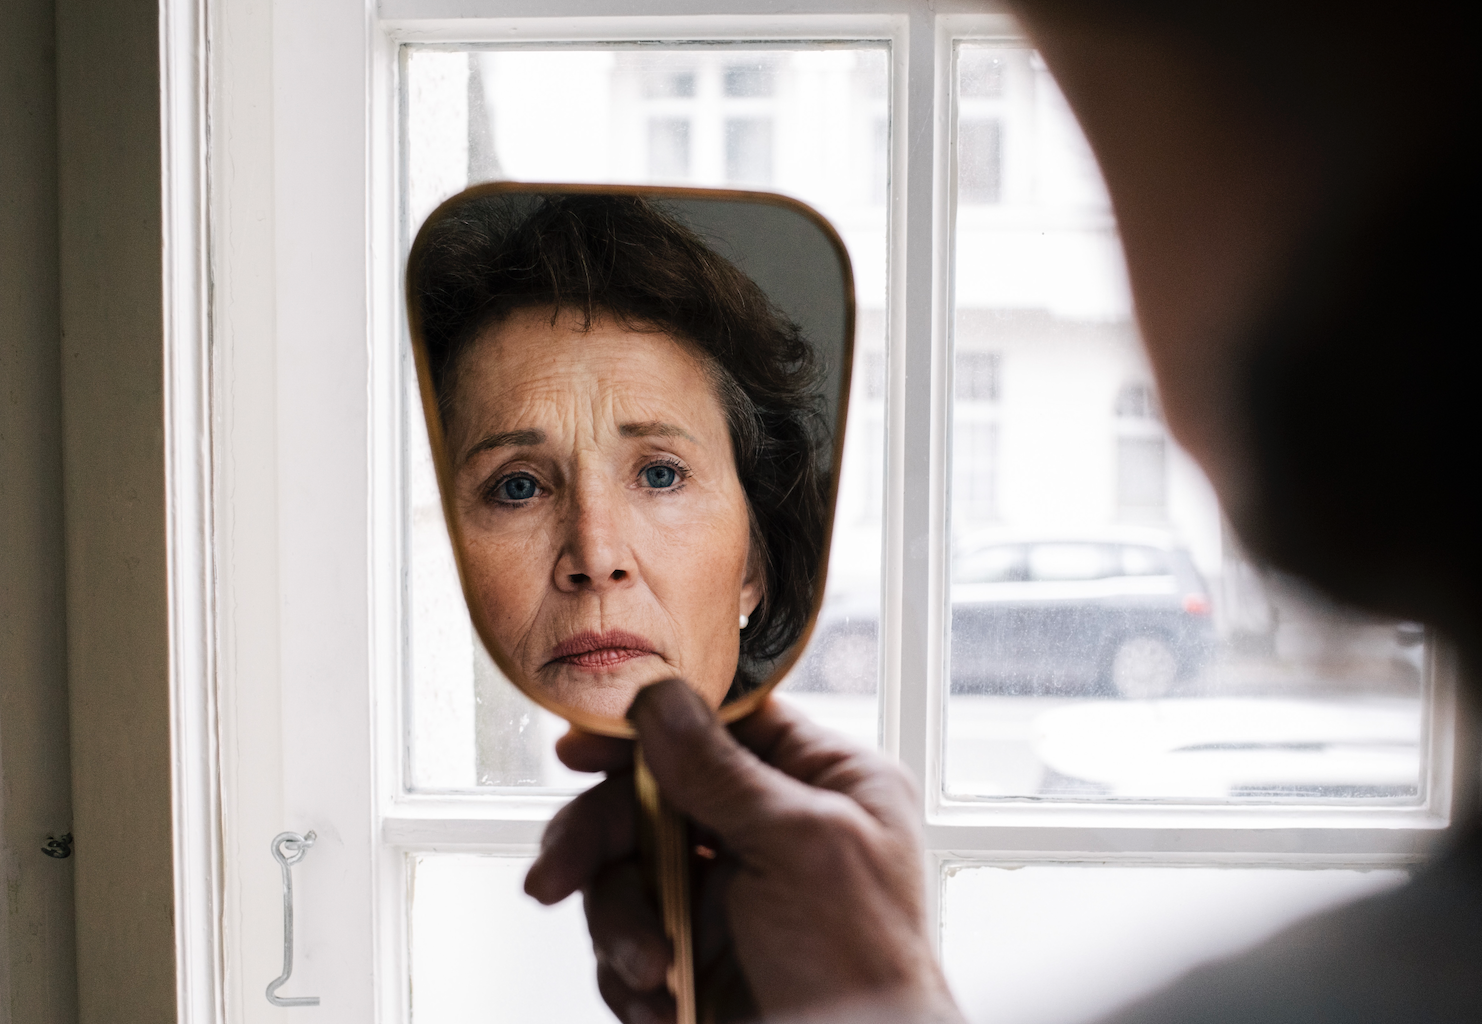 Old woman frowning at her reflection in a hand-held mirror